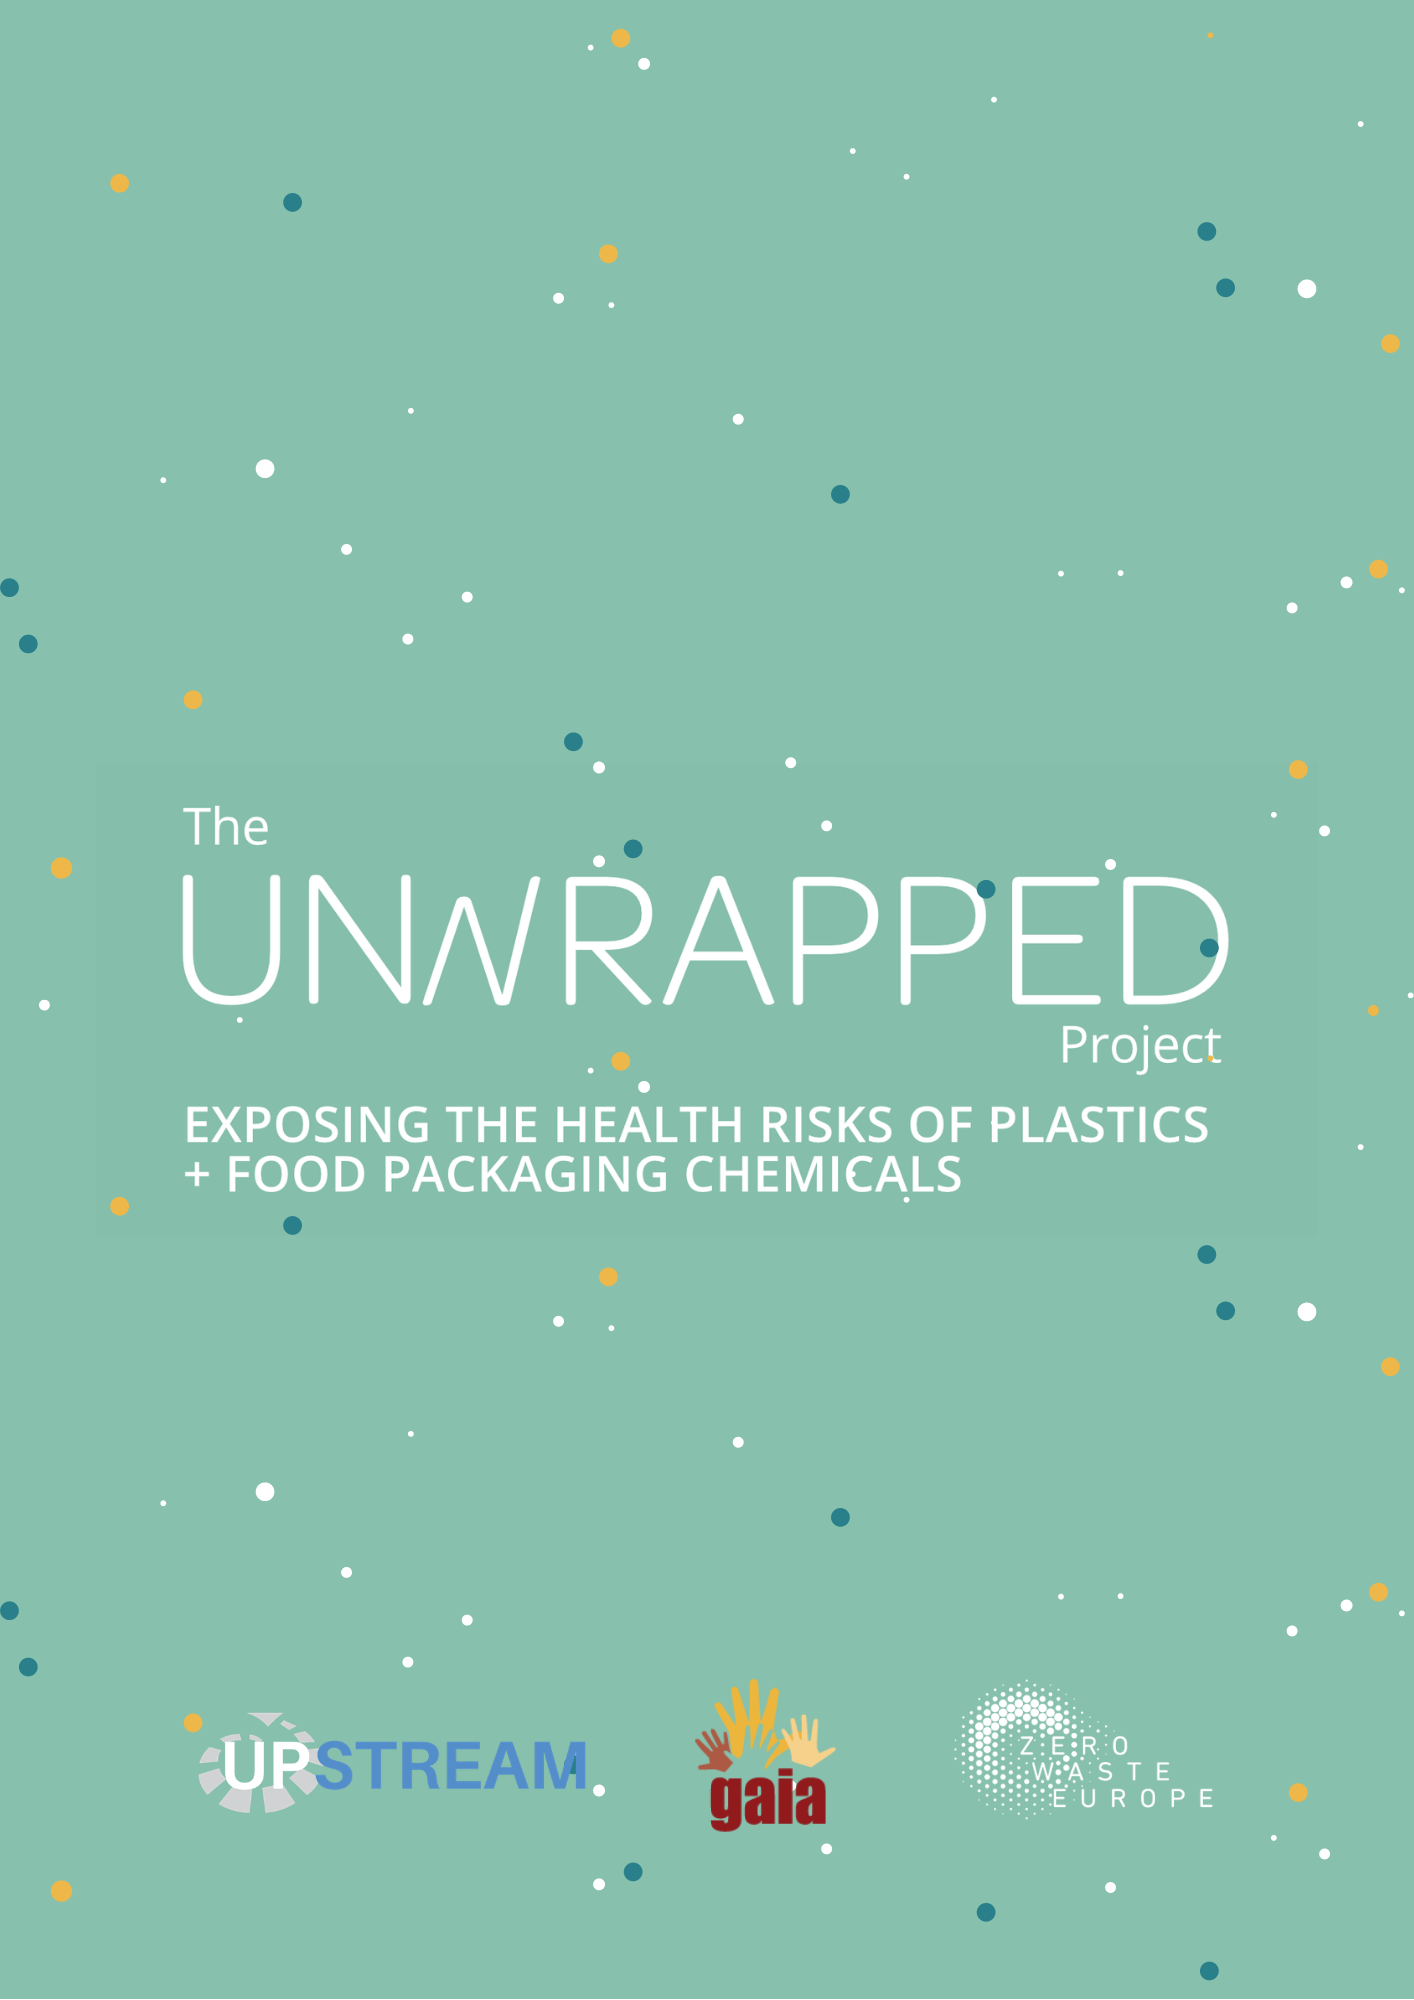 The UNWRAPPED Project’s toolkit. Exposing the health risk of food packaging chemicals